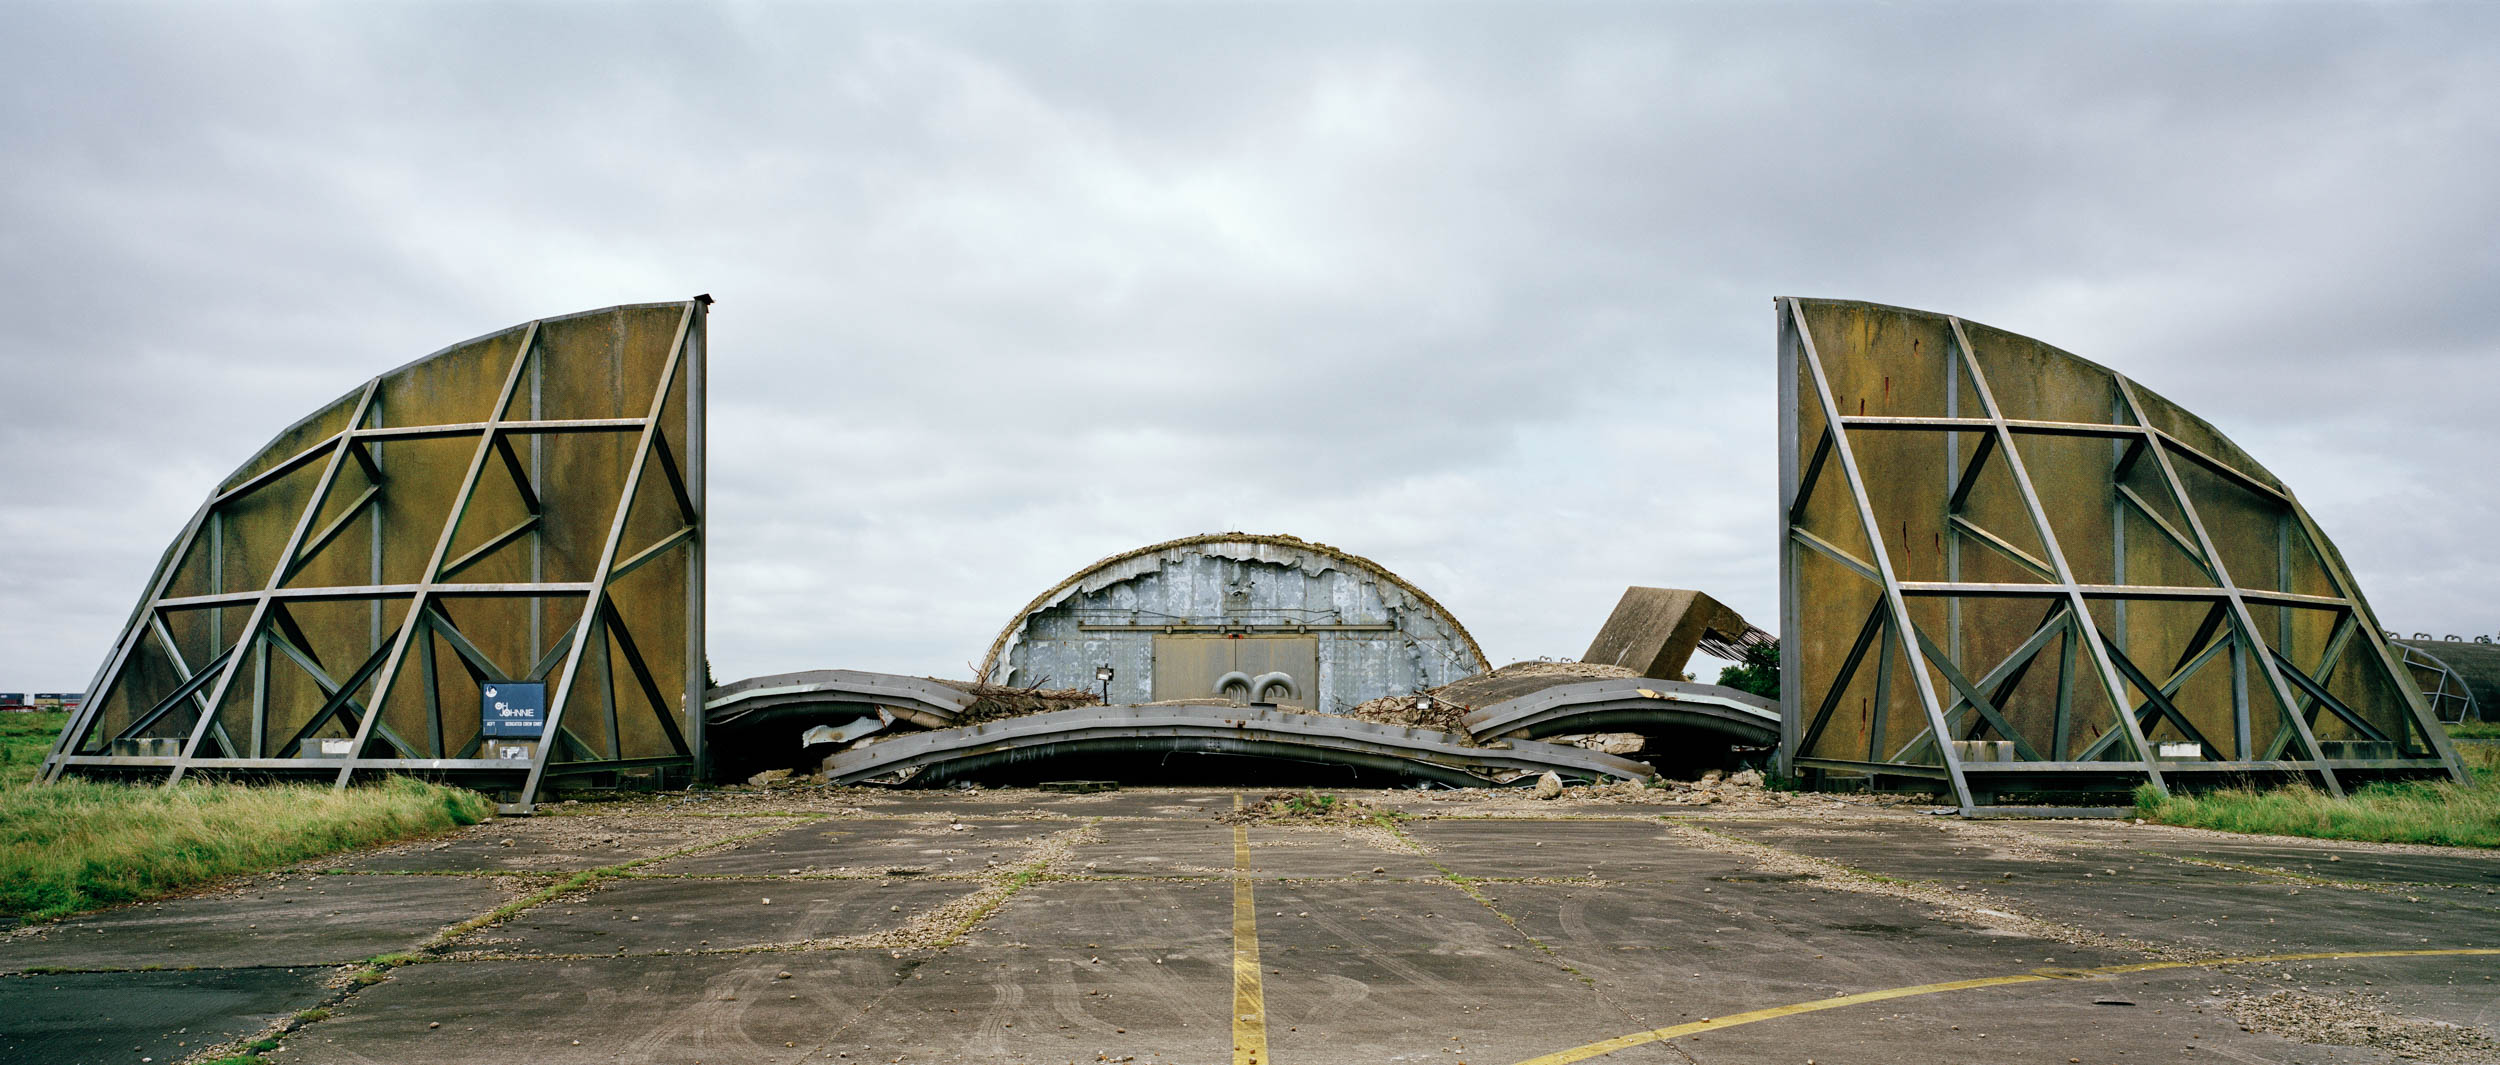 United Kingdom. Blown-up airplane shelter at a US Air Force base